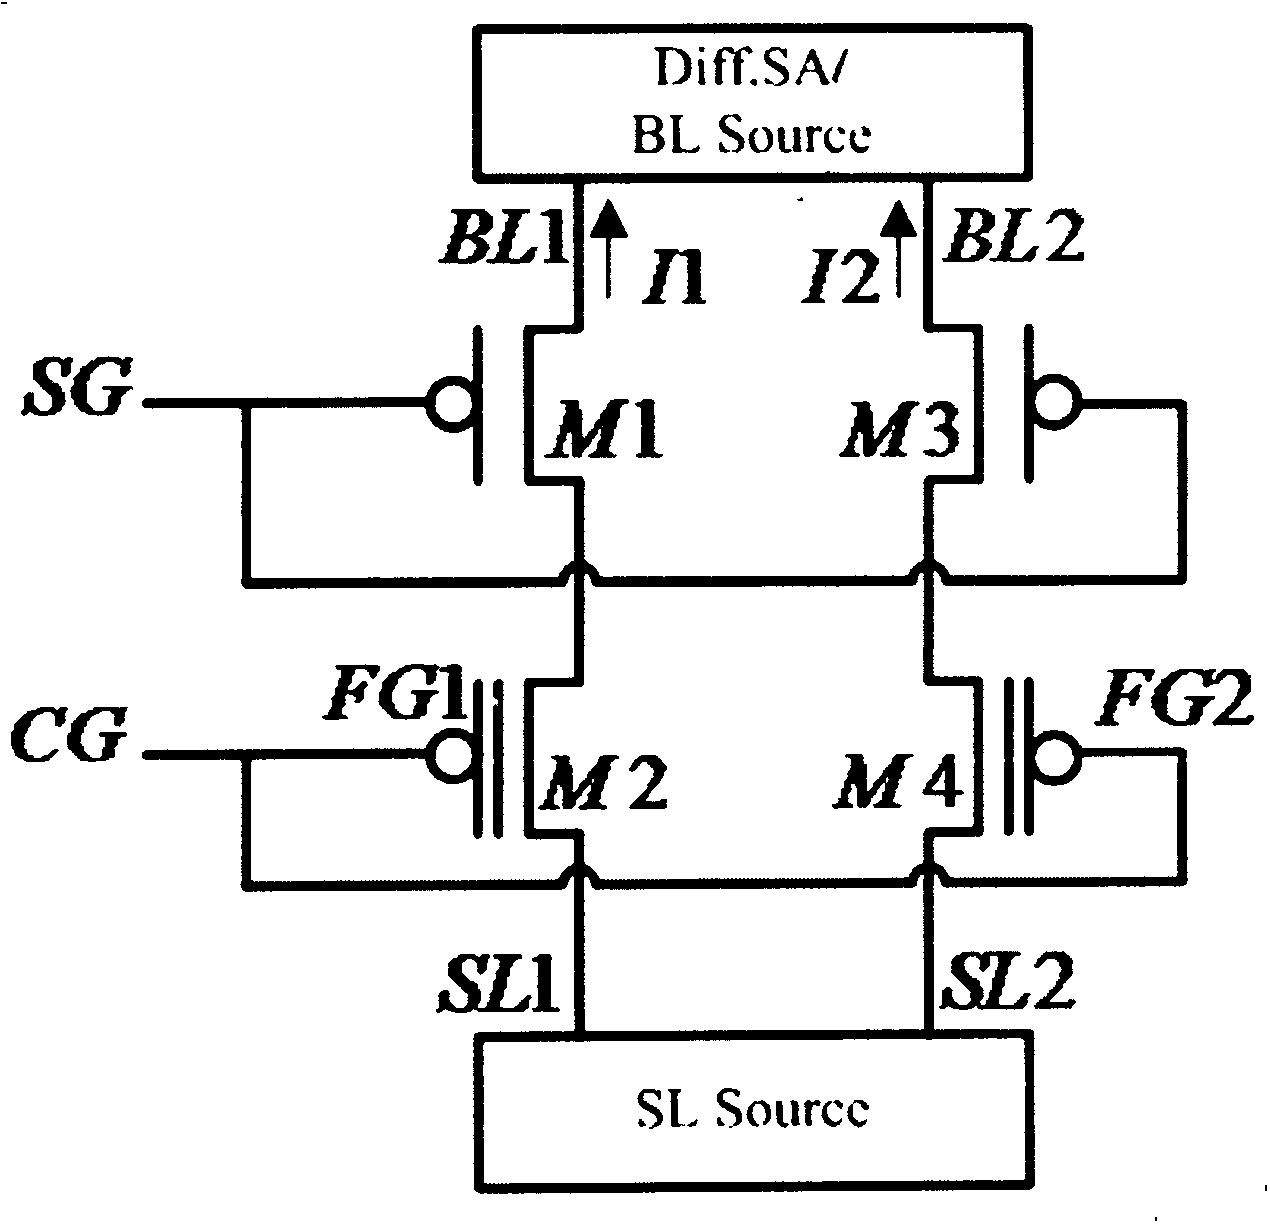 Improved differential framework Nor flash storage unit based on serially-connected transistor type